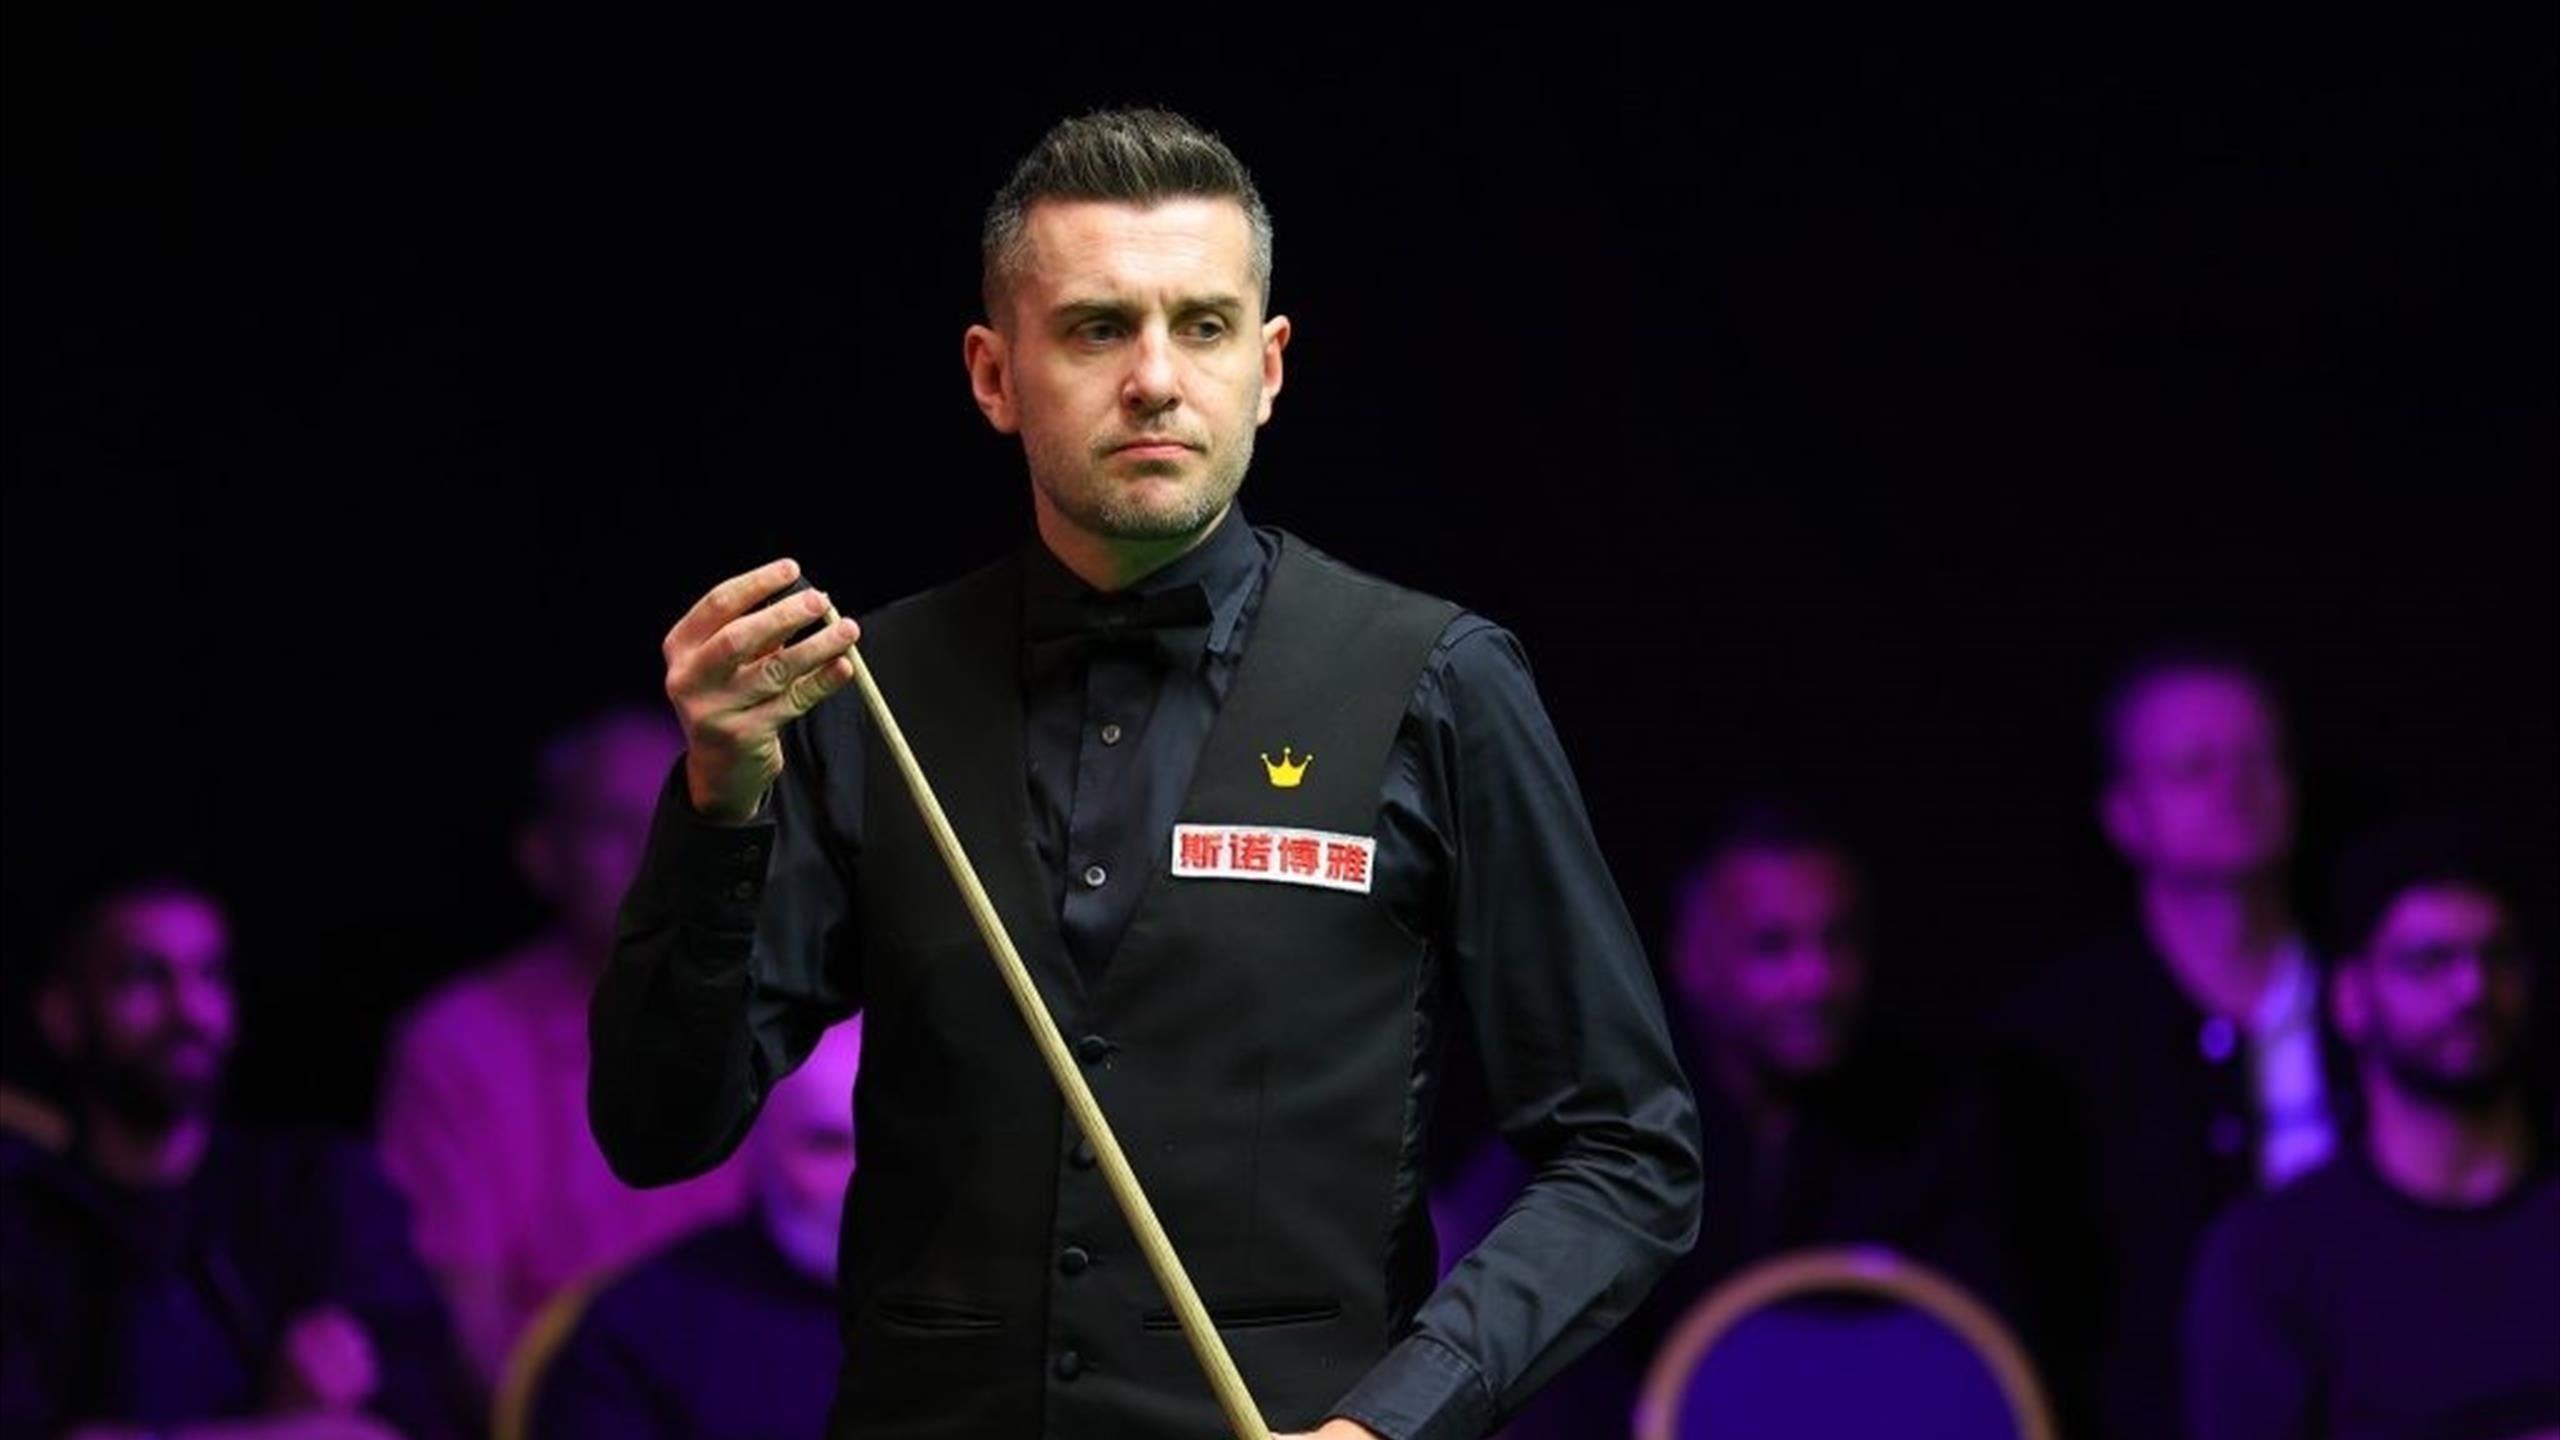 Mark Selby, John Higgins and Neil Robertson also bid farewell to Wuhan